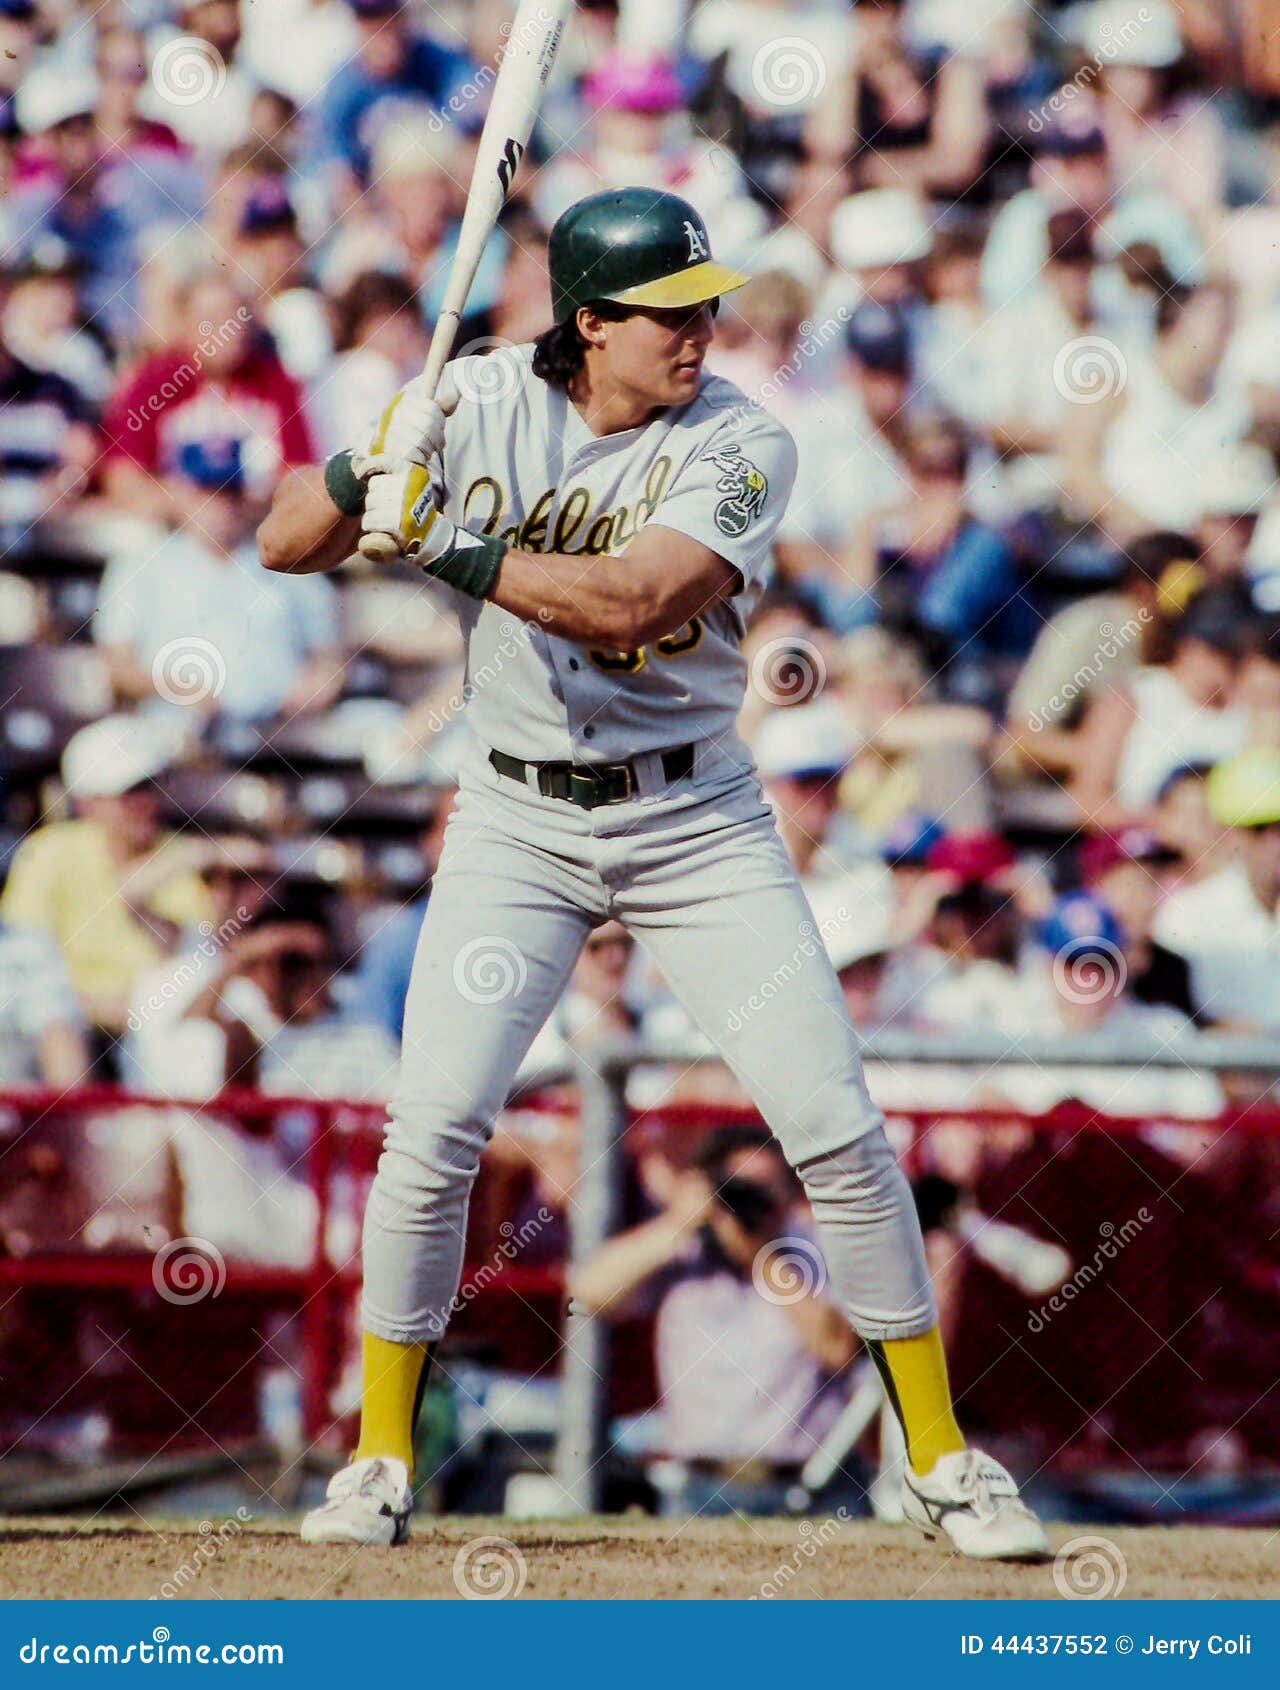 jose canseco batting